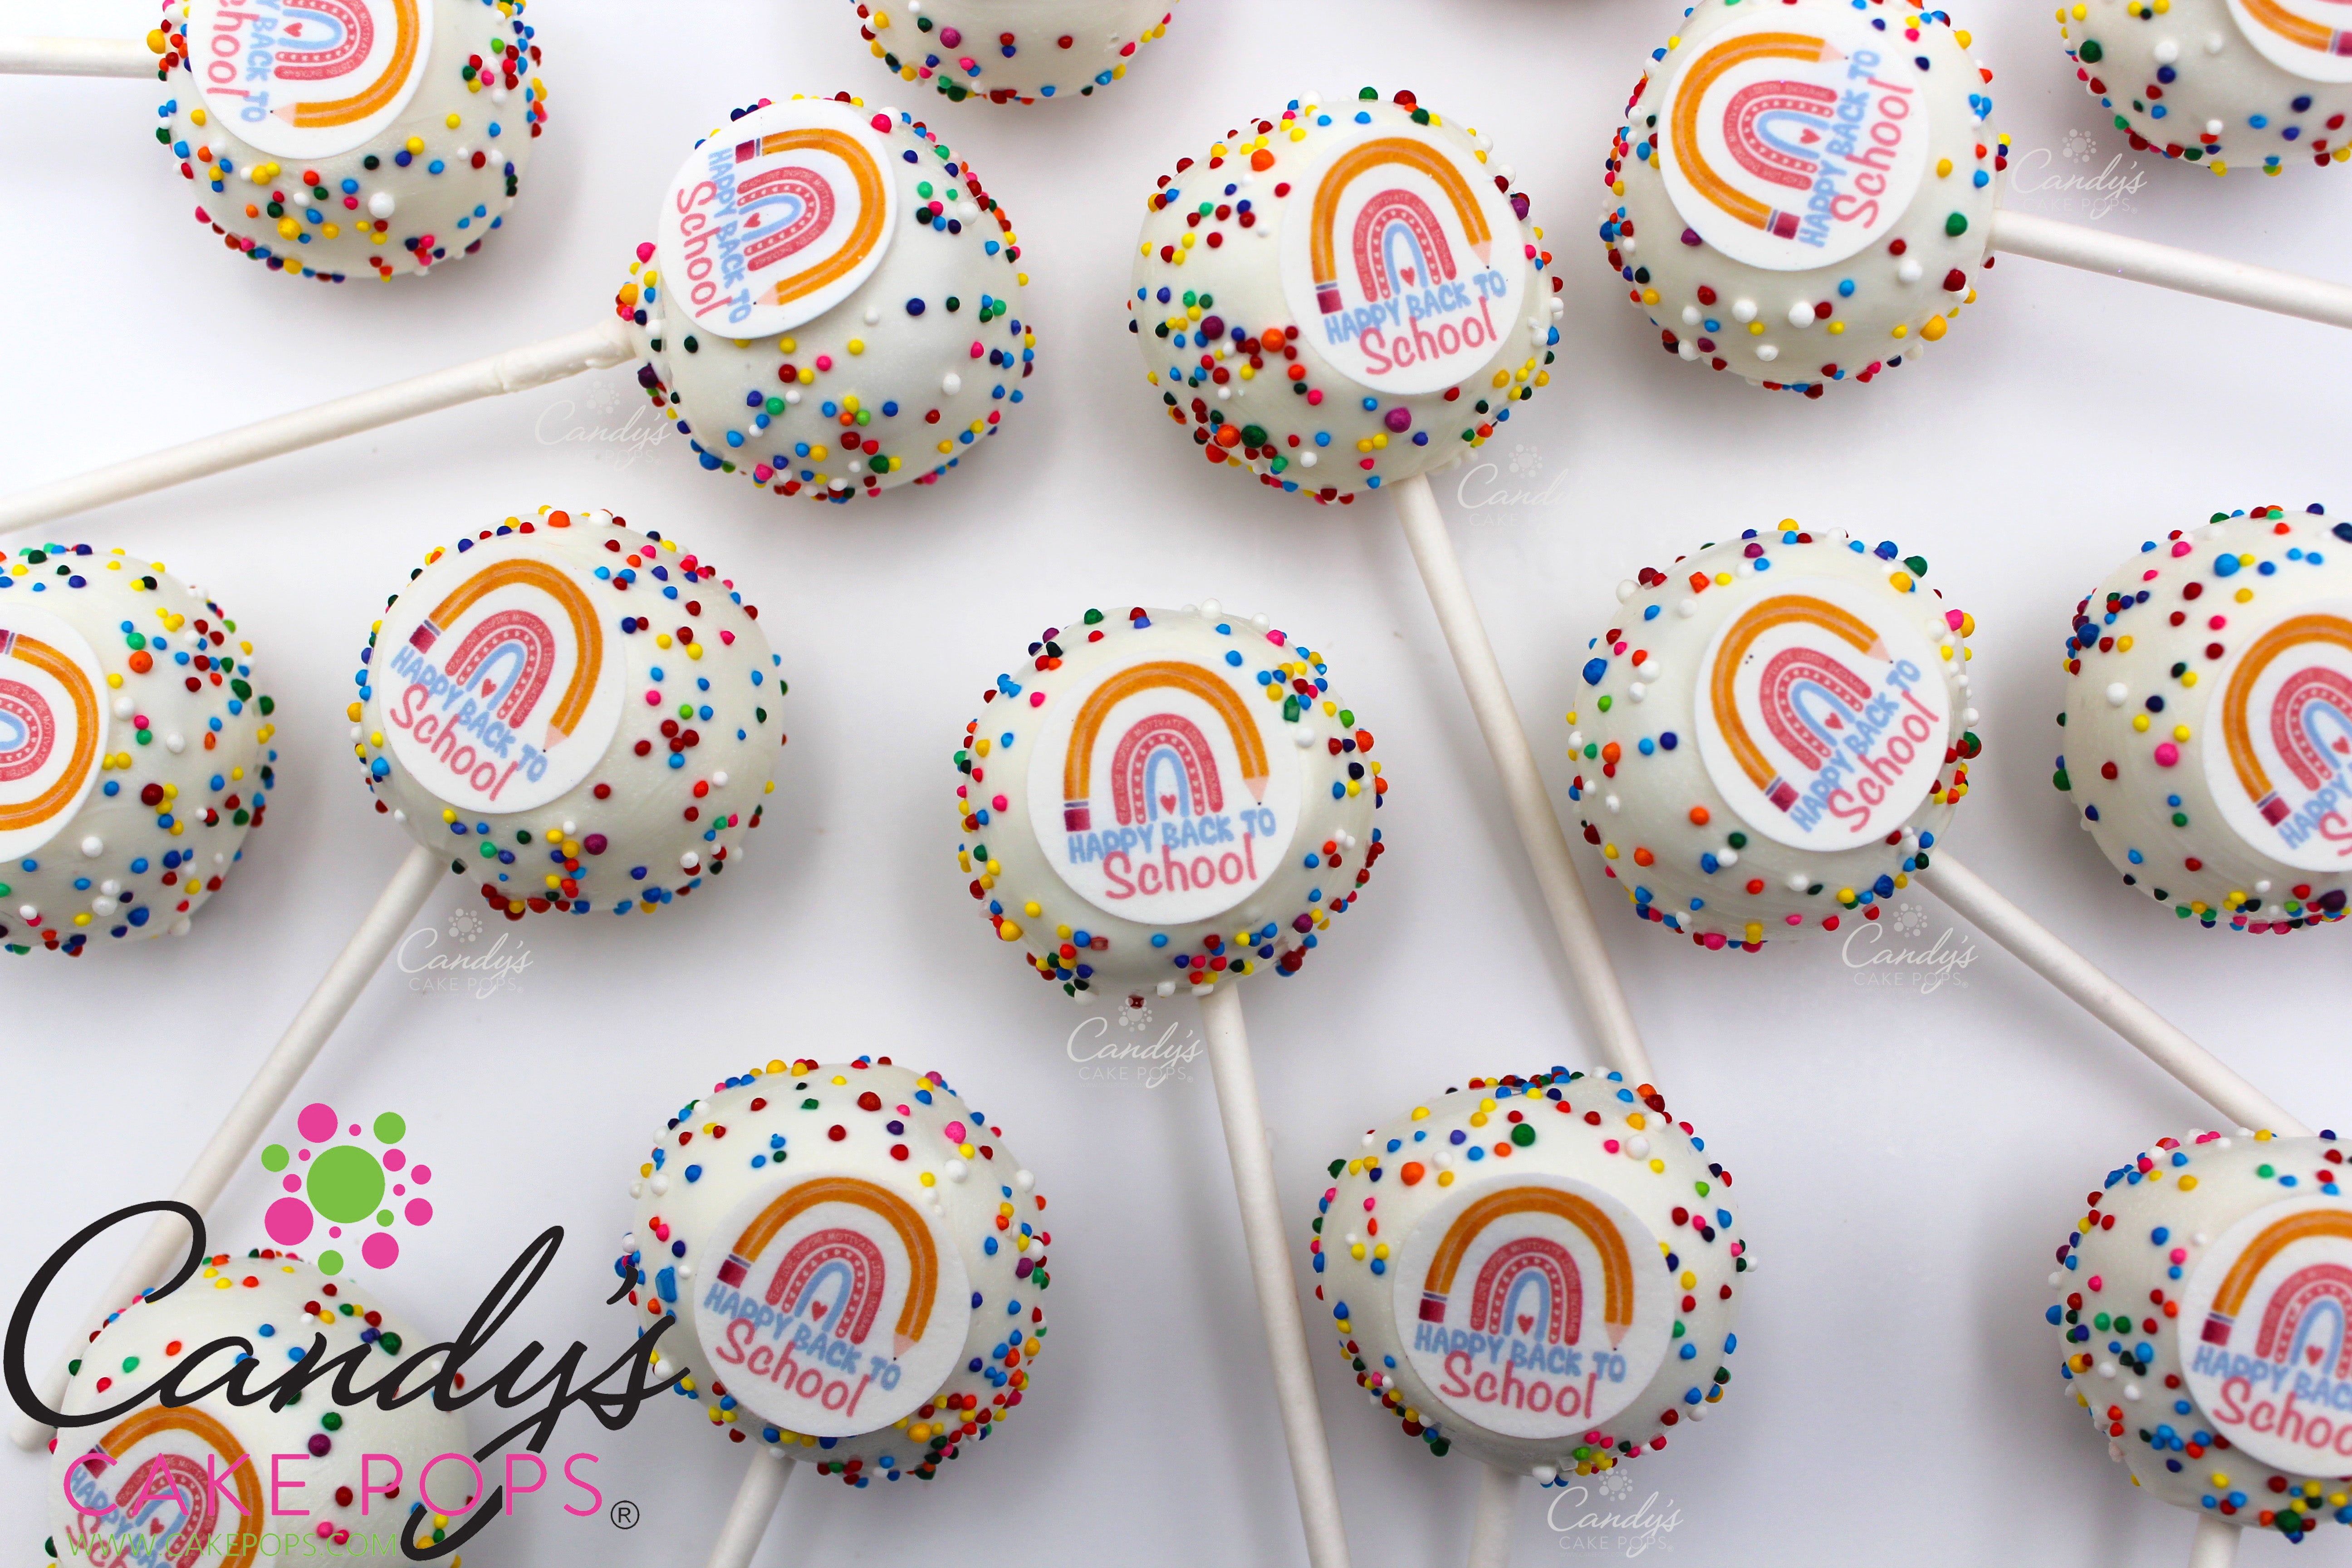 Gift Box Of Eight After Dark Cake Pops By The Baking Tree |  notonthehighstreet.com